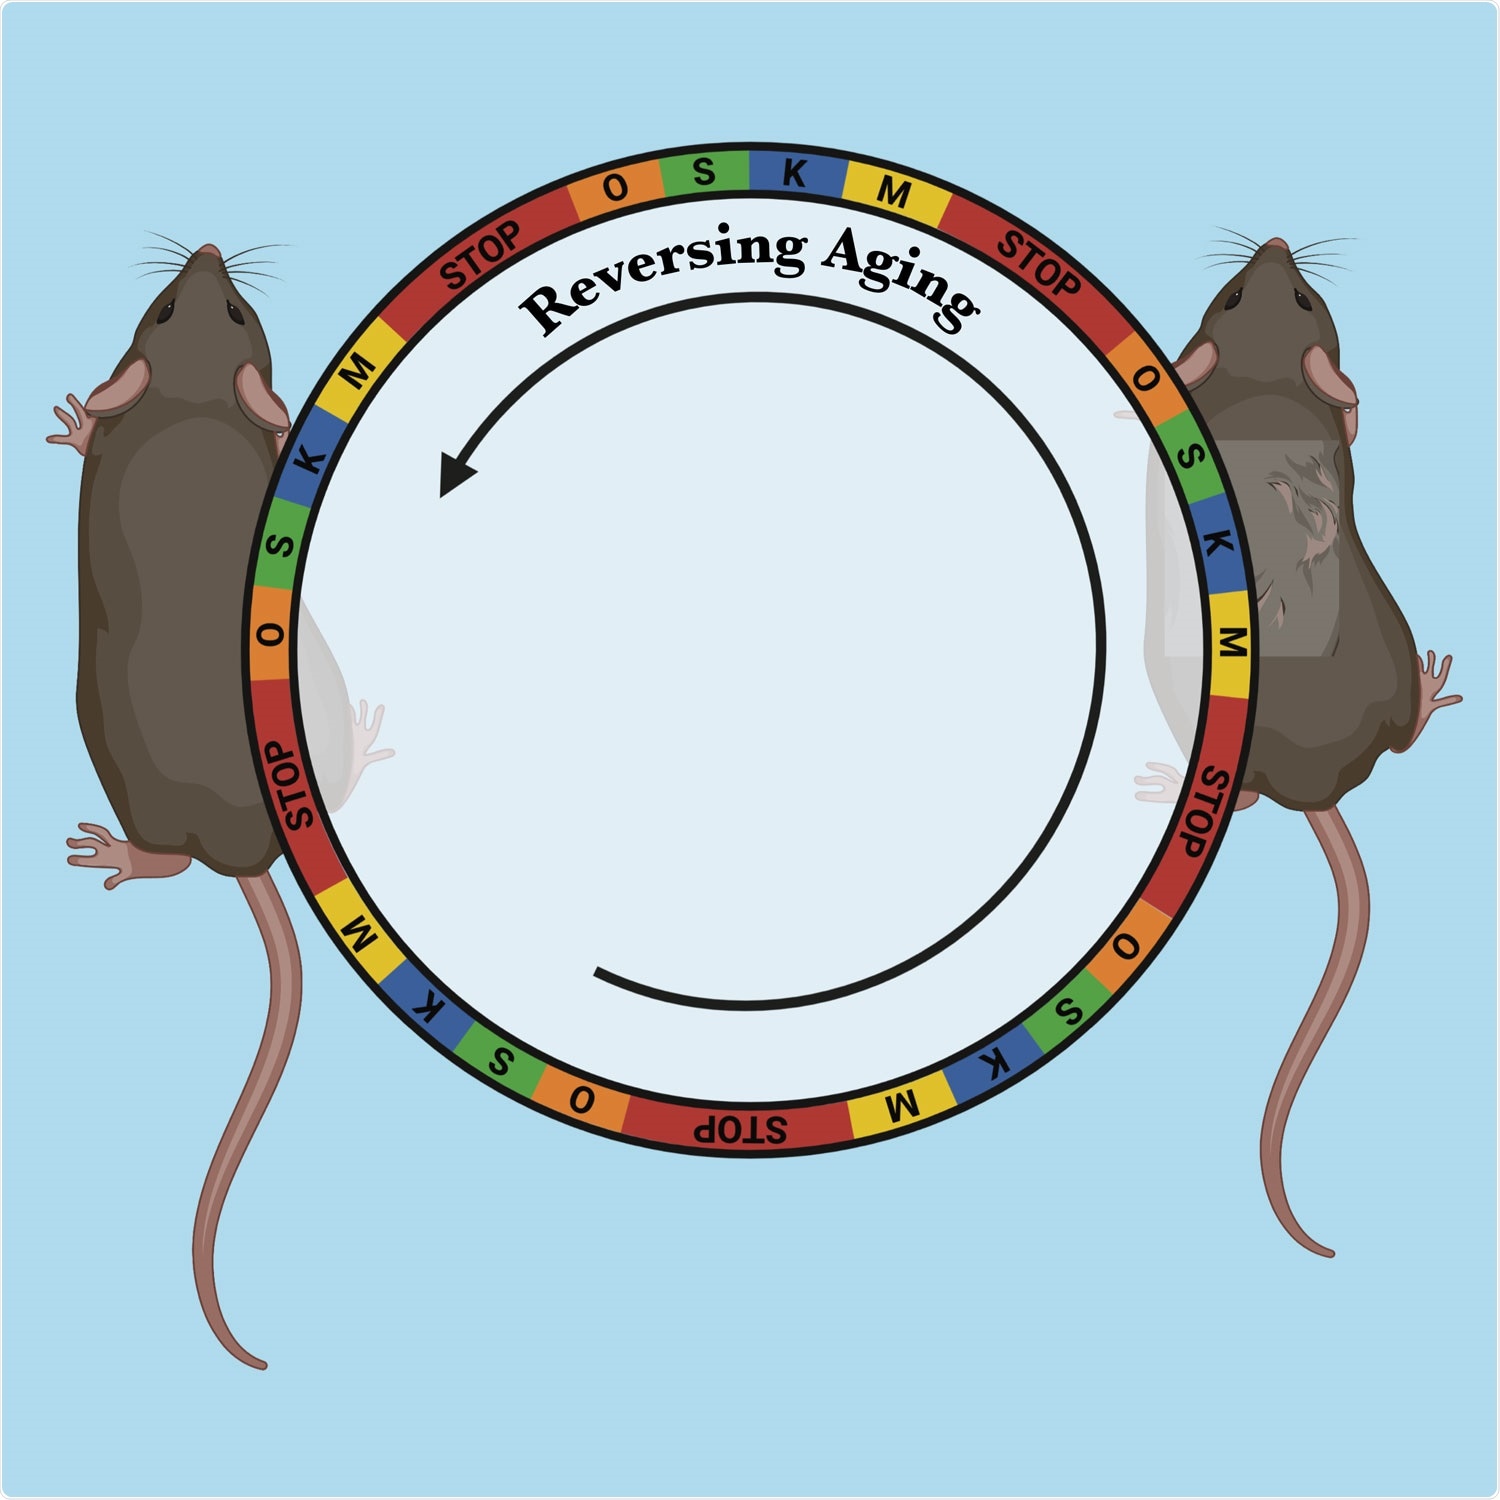 Researchers observe cellular rejuvenation therapy securely promoting reverse aging in mice